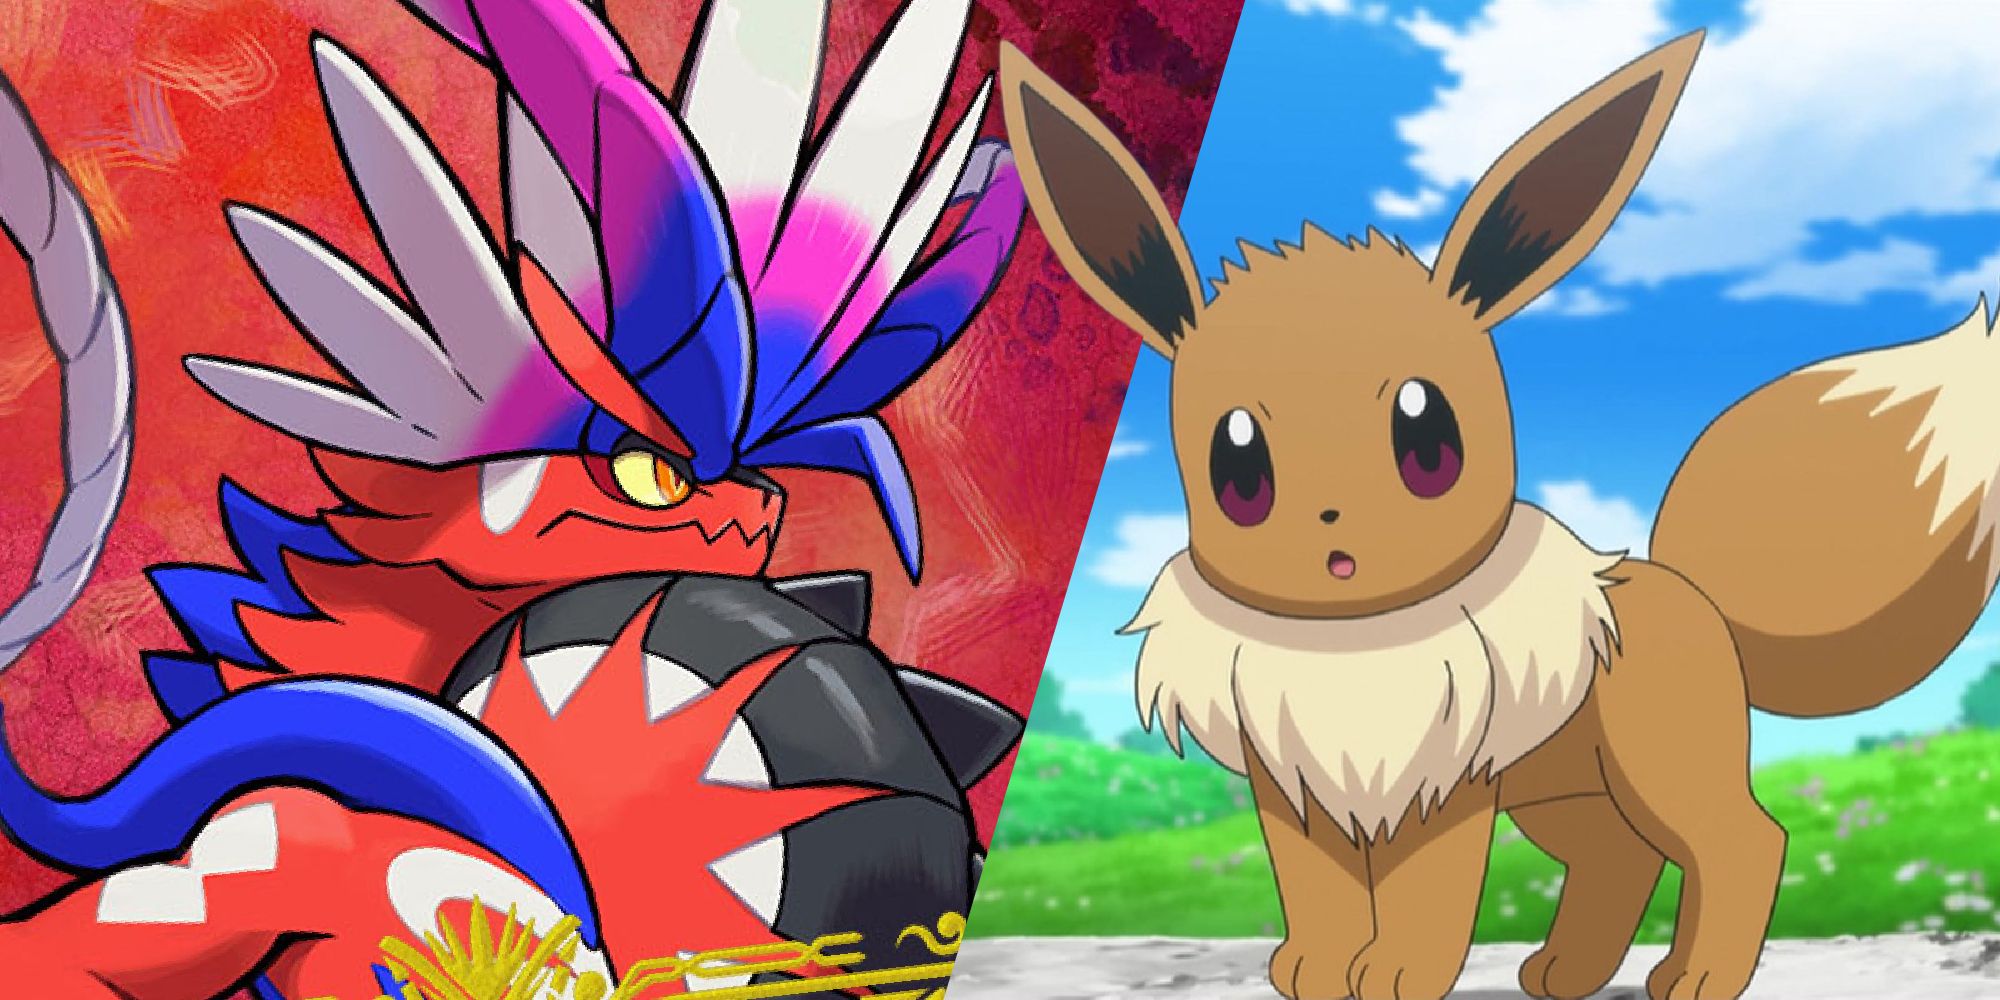 Eevee and Its Evolutions!, Pokémon Master Journeys: The Series